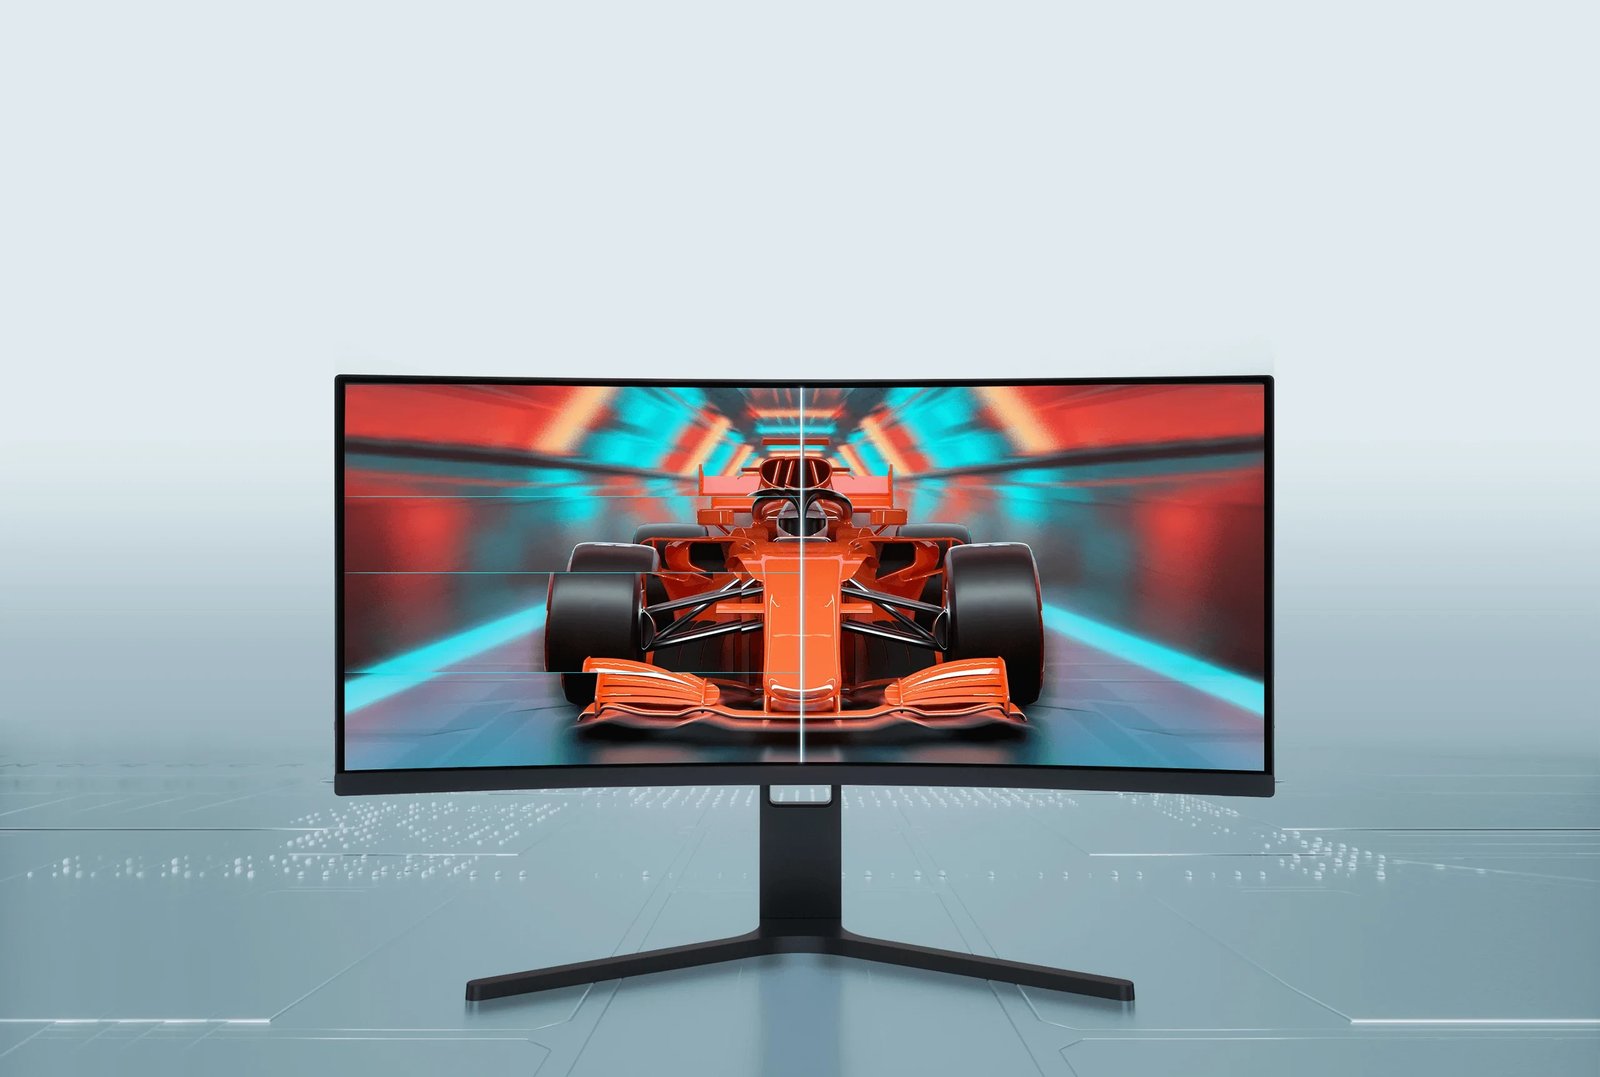 Monitor Xiaomi Curved Gaming Monitor 30